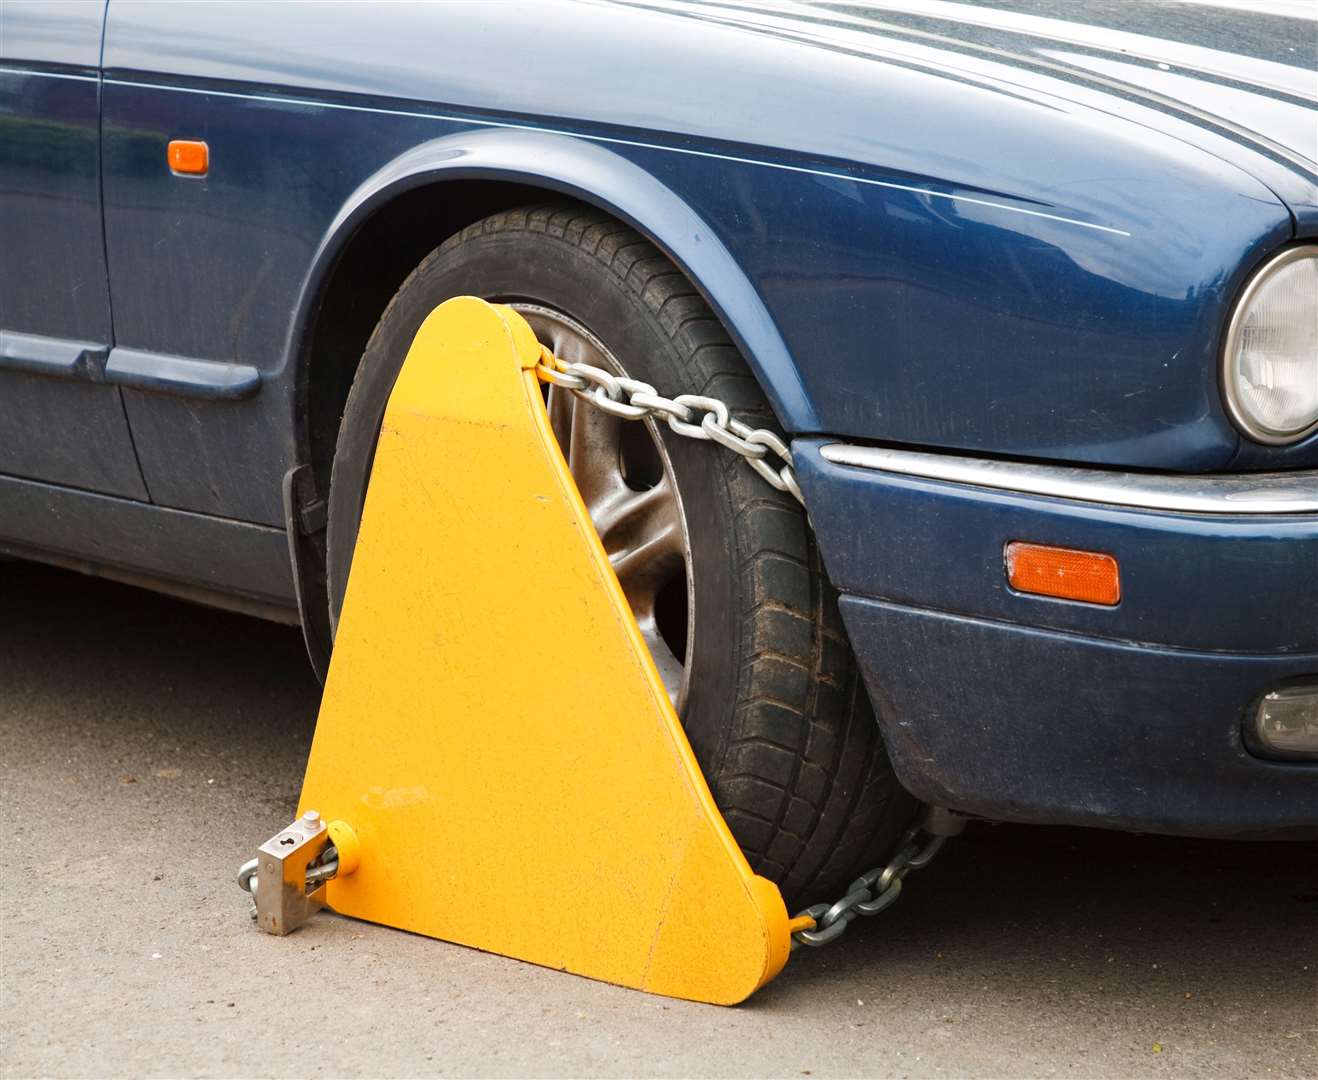 Twenty-seven local drivers had their vehicles seized or clamped this week. (Library picture; not necessarily the type of clamp used in the multi-agency operation.)